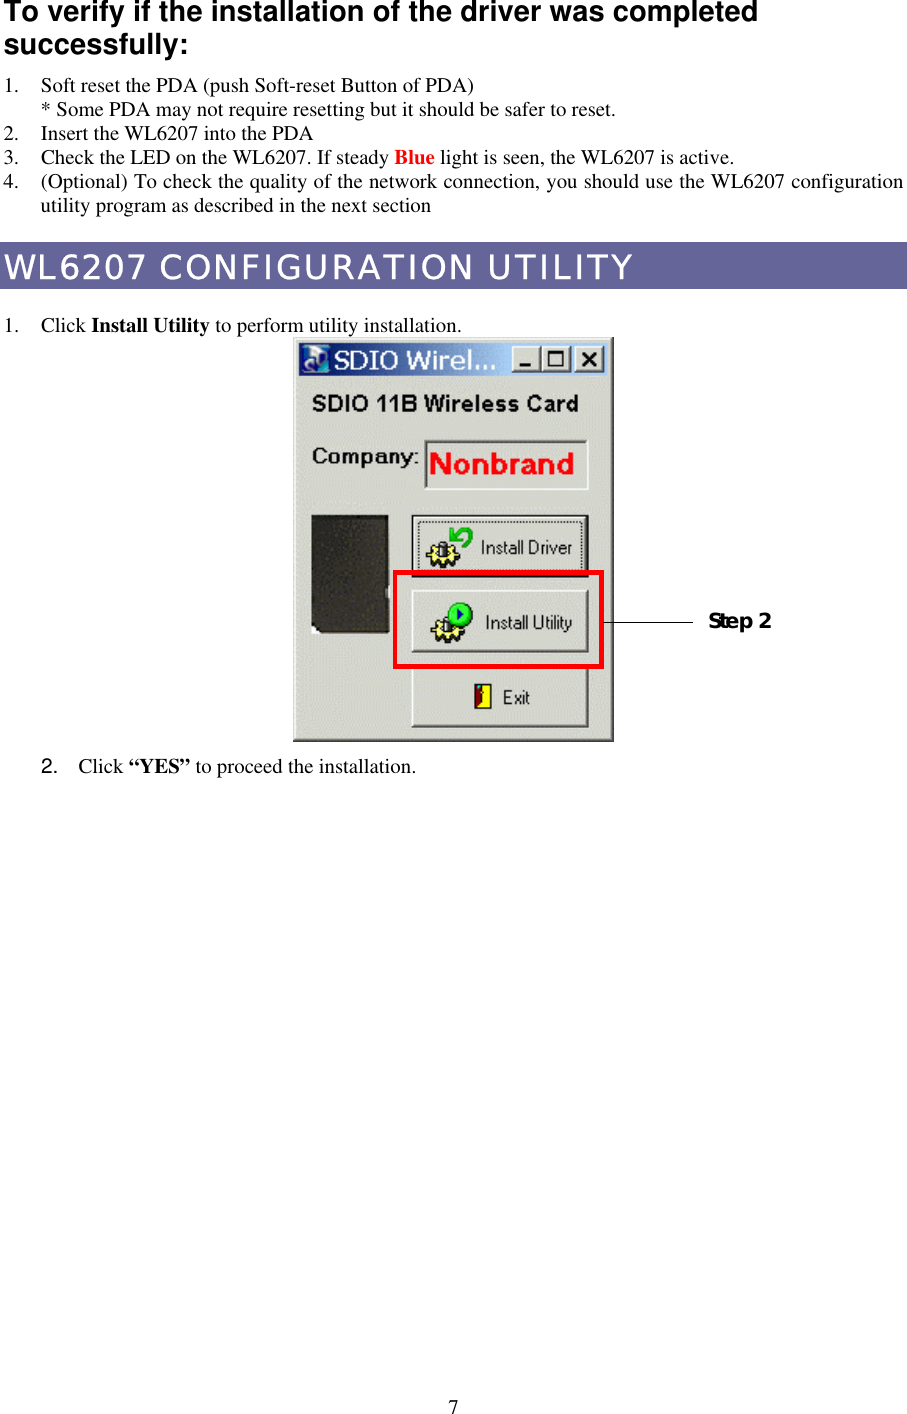 To verify if the installation of the driver was completed successfully: 1.  Soft reset the PDA (push Soft-reset Button of PDA) * Some PDA may not require resetting but it should be safer to reset. 2.  Insert the WL6207 into the PDA 3.  Check the LED on the WL6207. If steady Blue light is seen, the WL6207 is active. 4.  (Optional) To check the quality of the network connection, you should use the WL6207 configuration utility program as described in the next section WL6207 CONFIGURATION UTILITY  1. Click Install Utility to perform utility installation.    Step 2 2.  Click “YES” to proceed the installation.  7